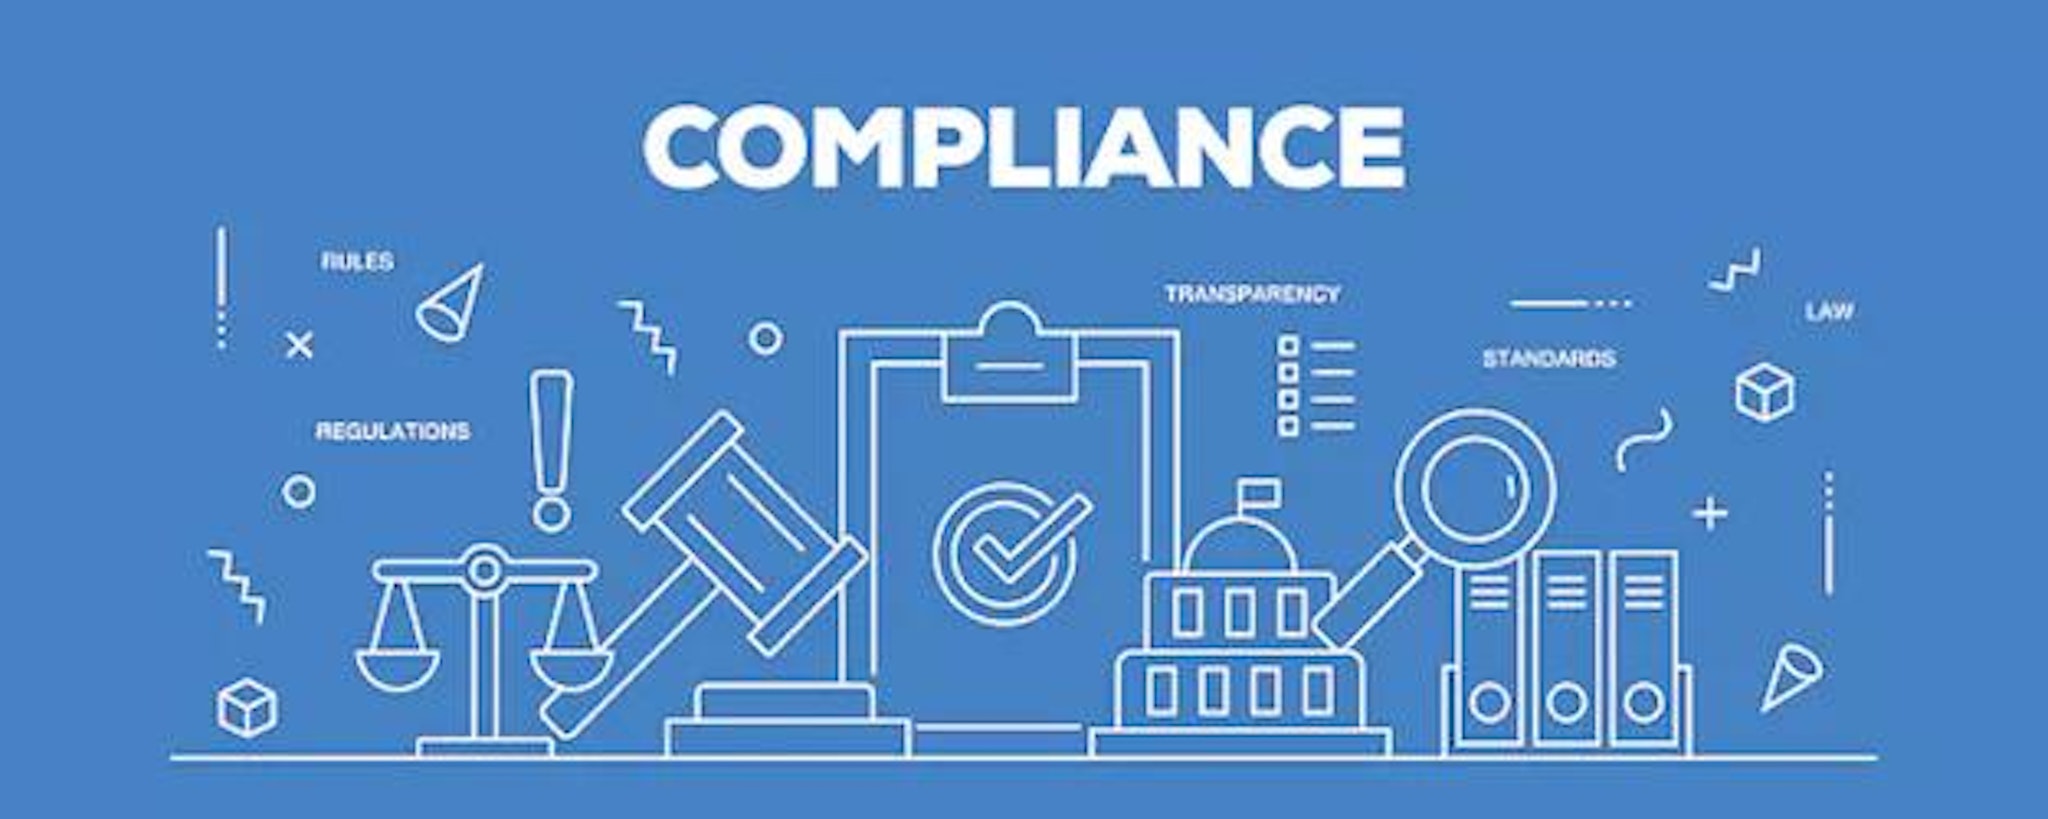 Image representing the different aspects of regulatory compliance